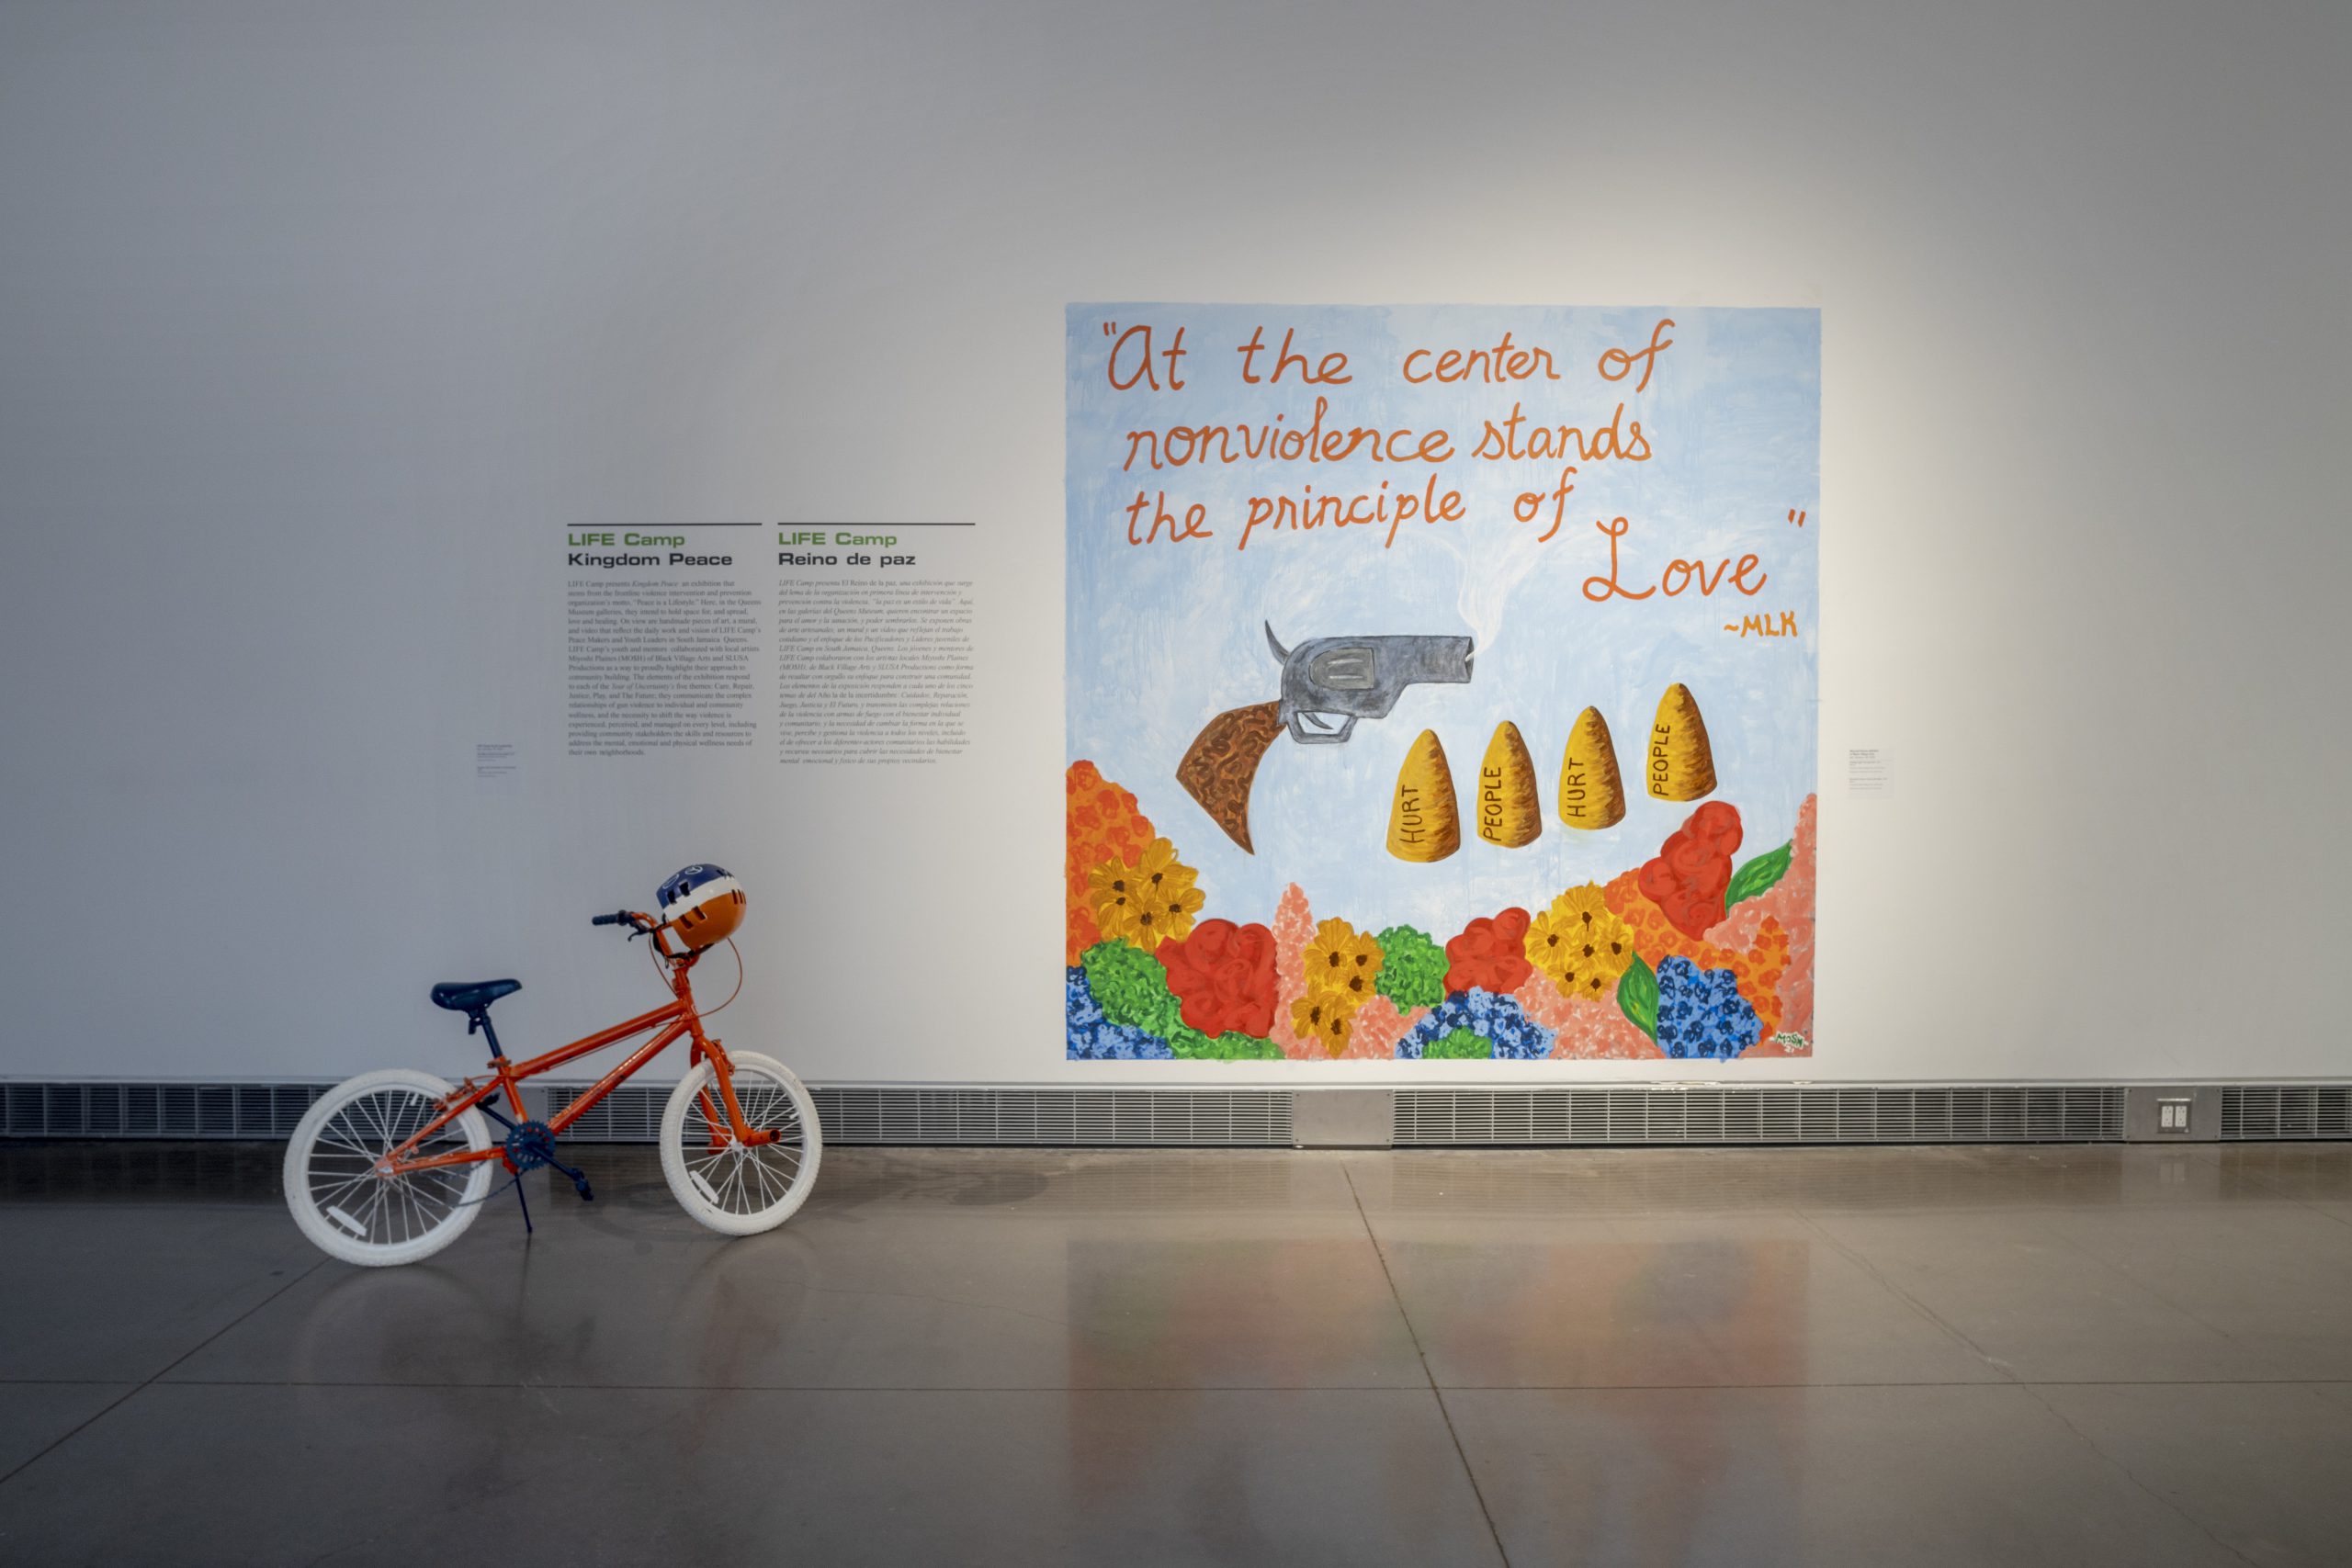 On a white wall is a large colorful mural with a smoking handgun. Beside it are four bullets, each with one word of the phrase Hurt People Hurt People. On the bottom are painted flowers in many different colors. Above the gun, text is written in cursive: ‘At the center of nonviolence stands the principle of Love, a quote attributed to M L K. To the left of the mural is a large white wall text, and to the left is an orange bicycle with white wheels and a blue and white helmet.